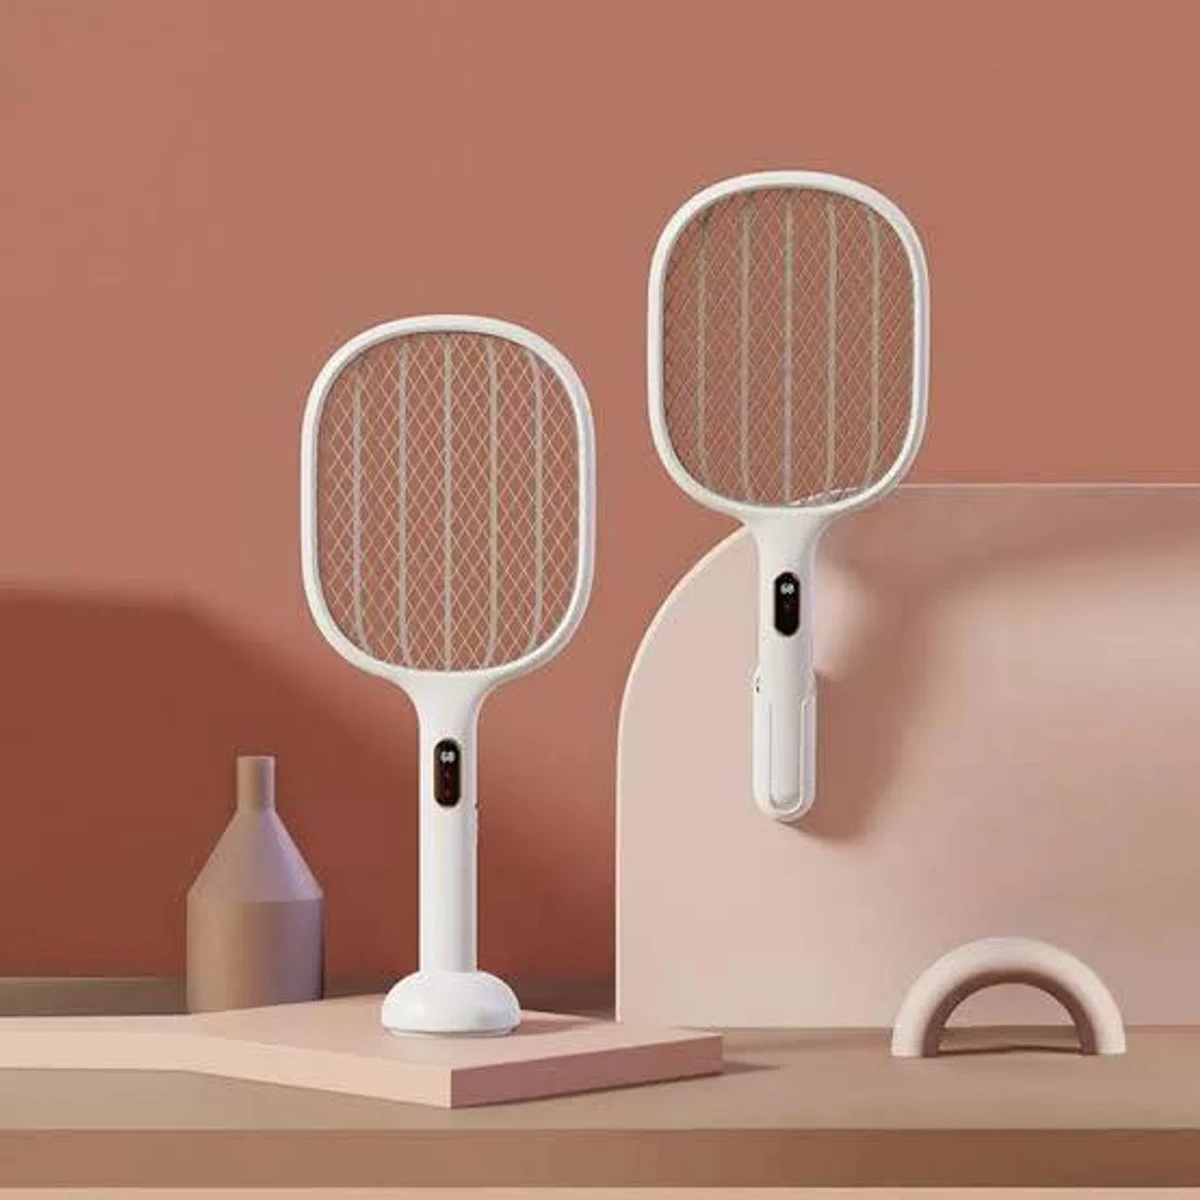 Qualitell Smart Digital Display Electric Mosquito Swatter S1